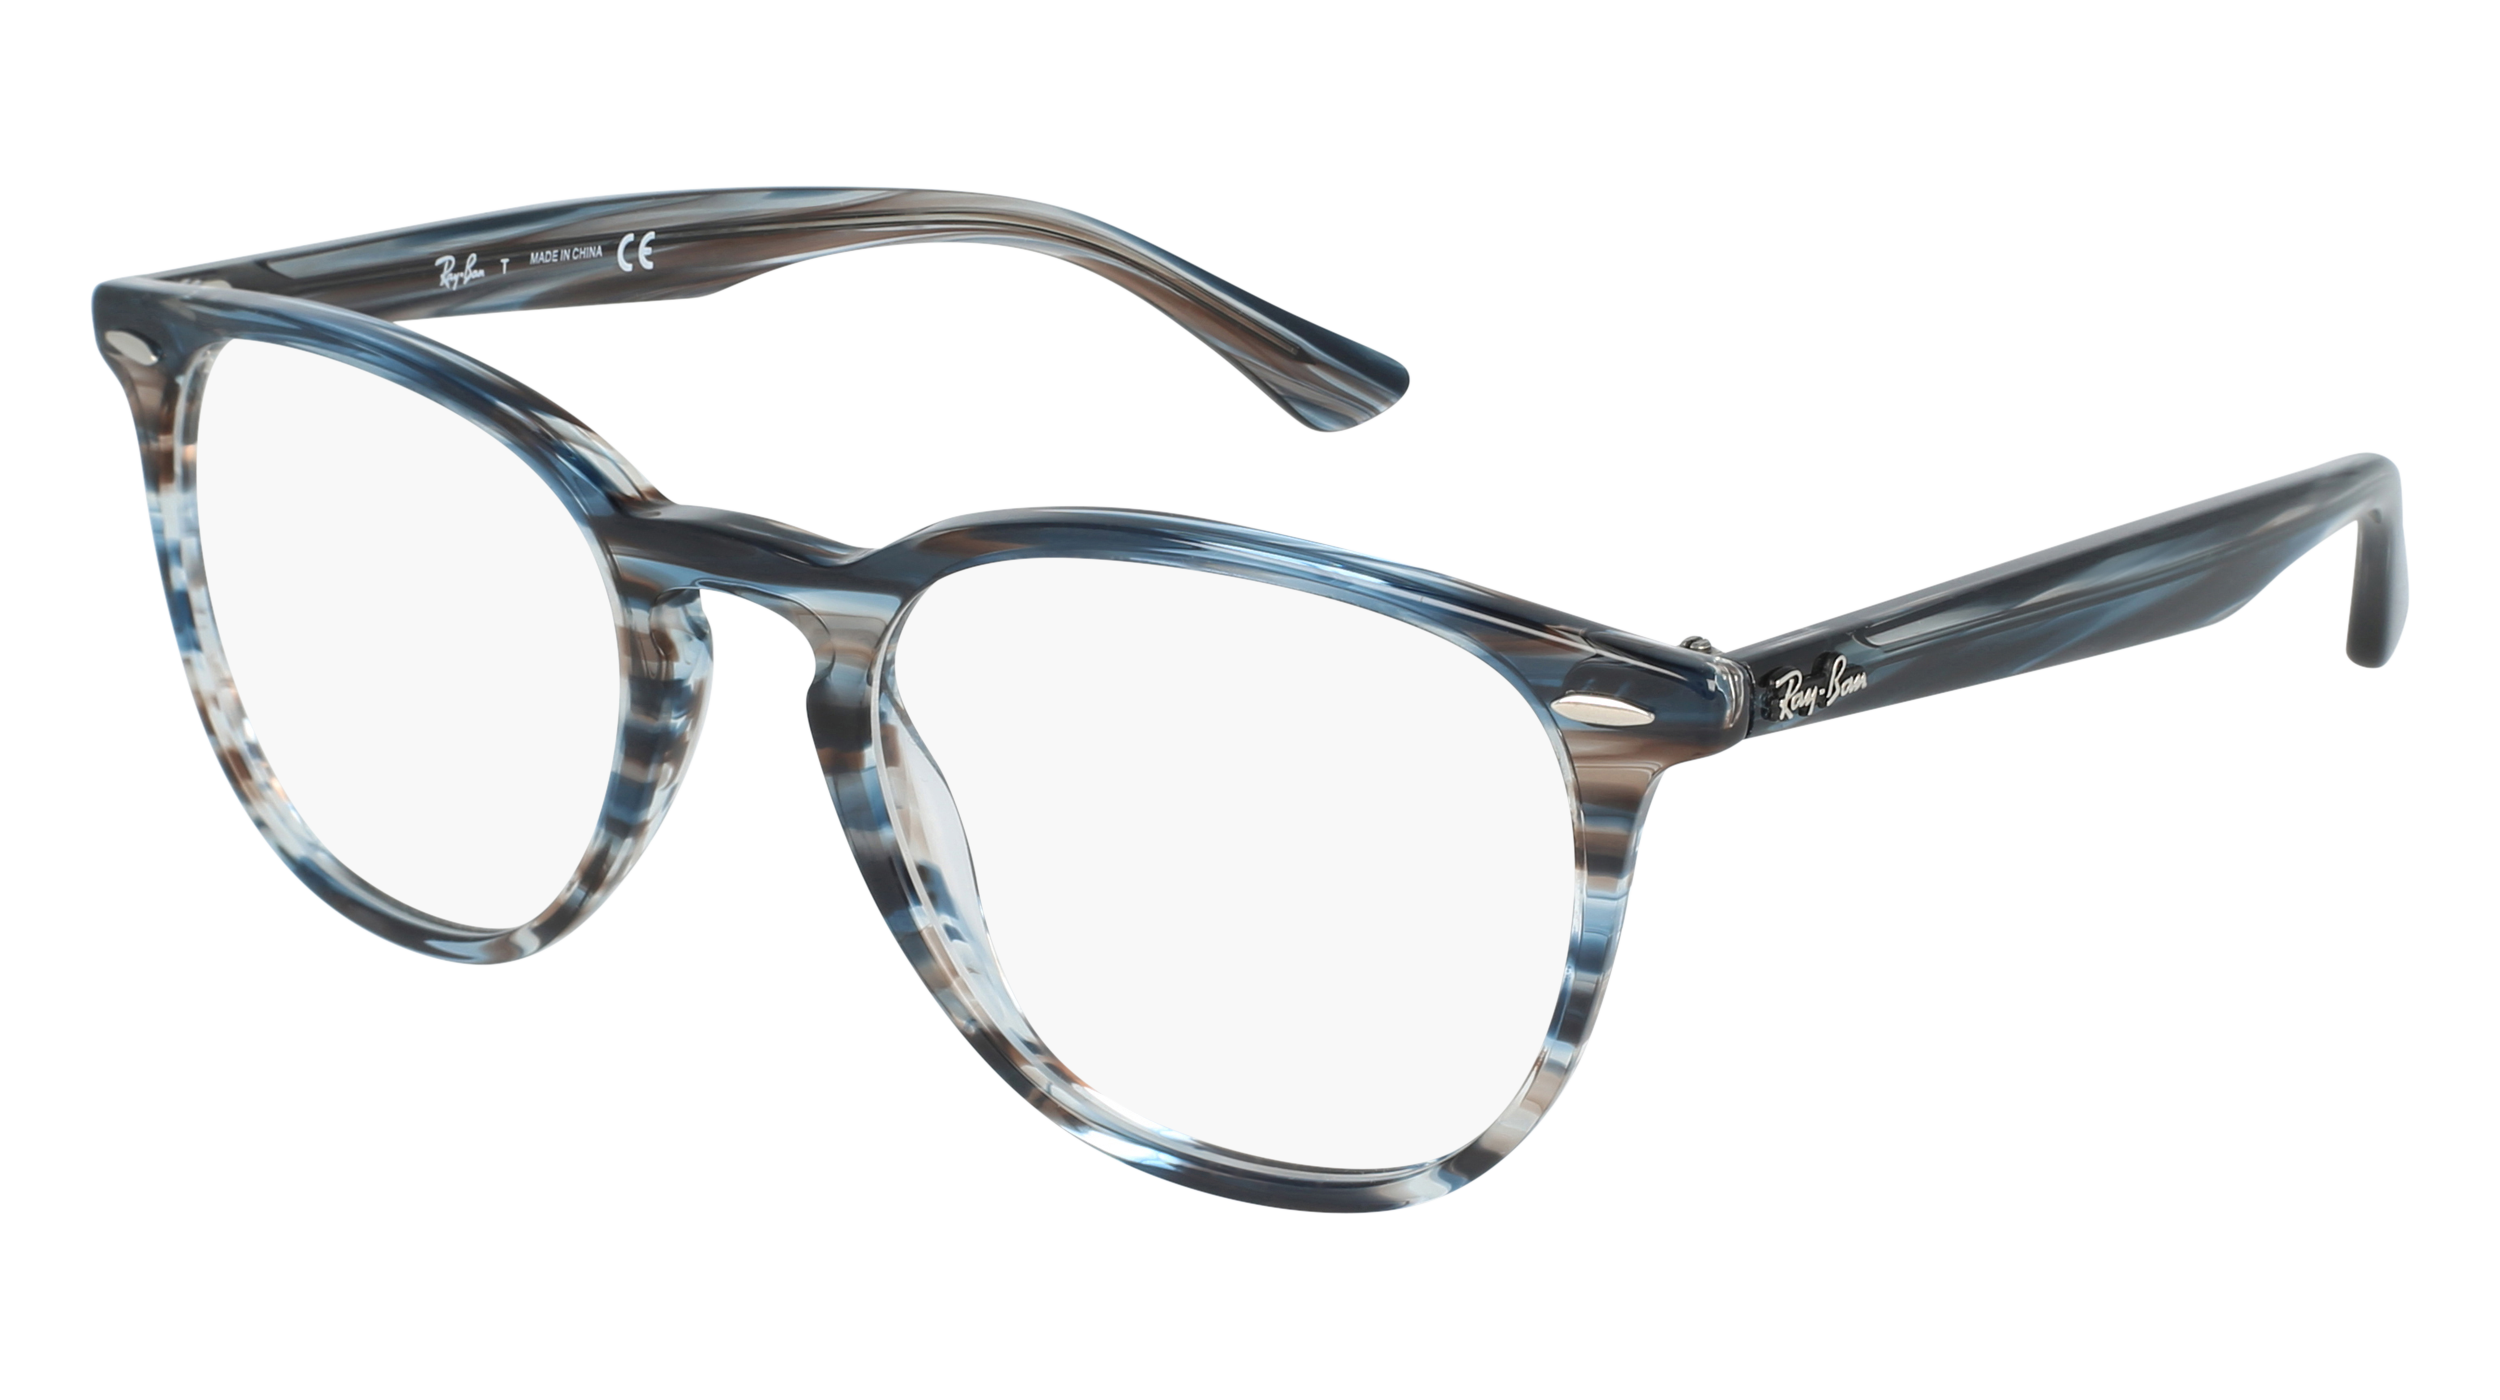 R RB 7159 unisex's eyeglasses (from the side)